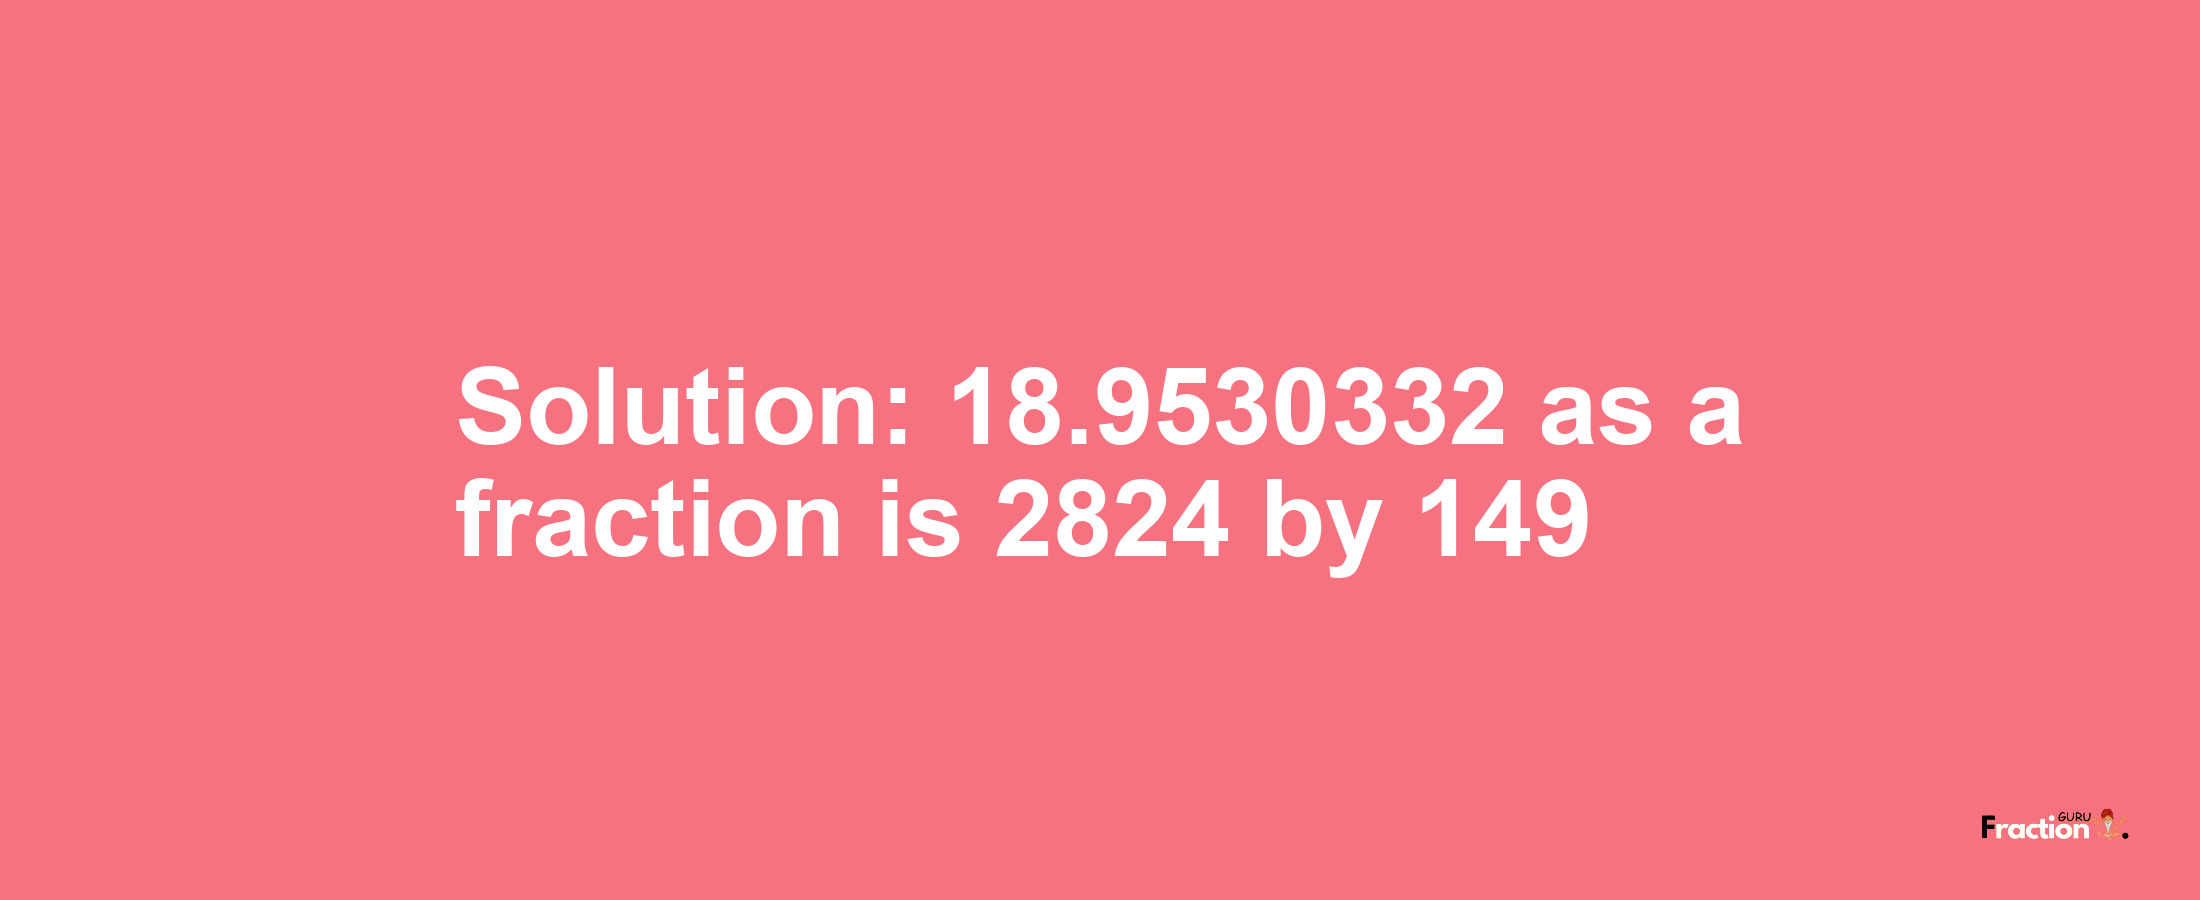 Solution:18.9530332 as a fraction is 2824/149